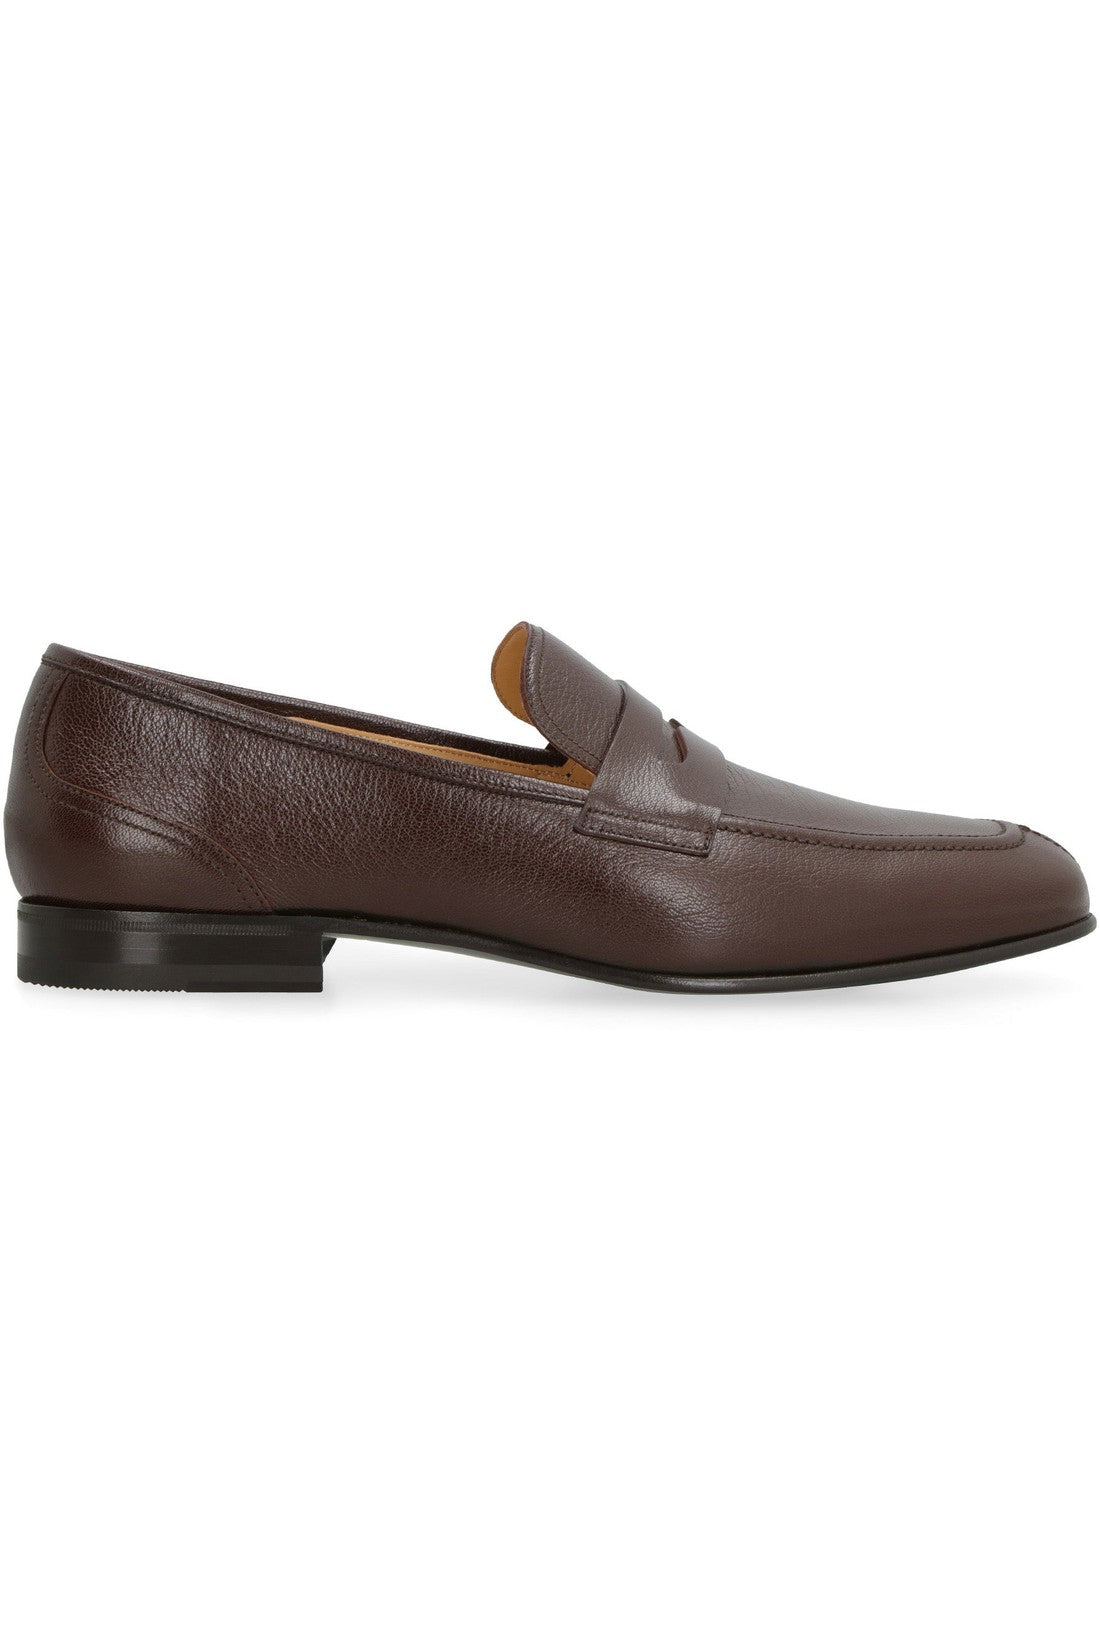 Bally-OUTLET-SALE-Saix leather loafers-ARCHIVIST